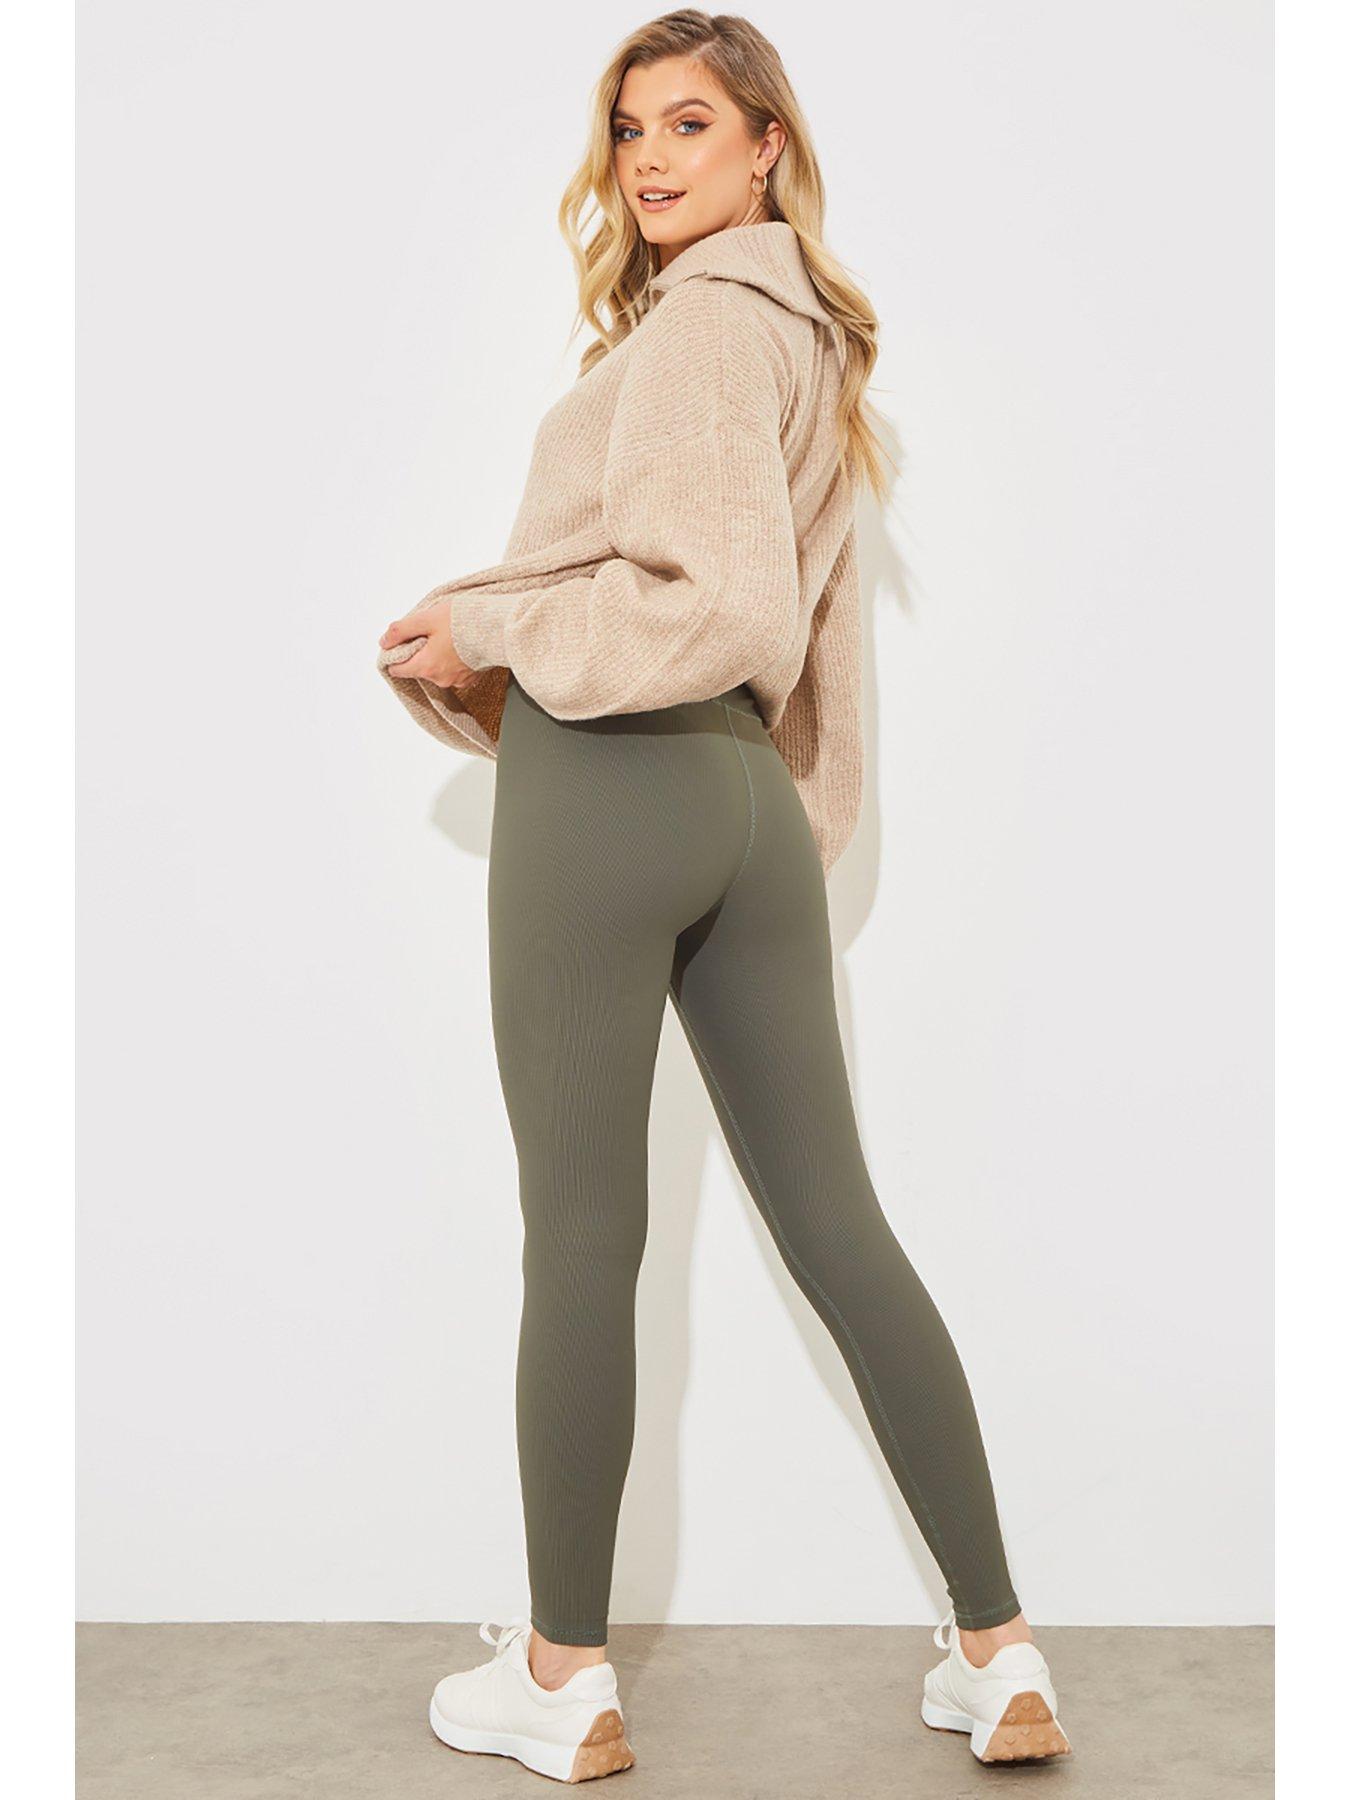 Curves and Chill Legging Set  Khaki (Plus) – In The Starz Boutique